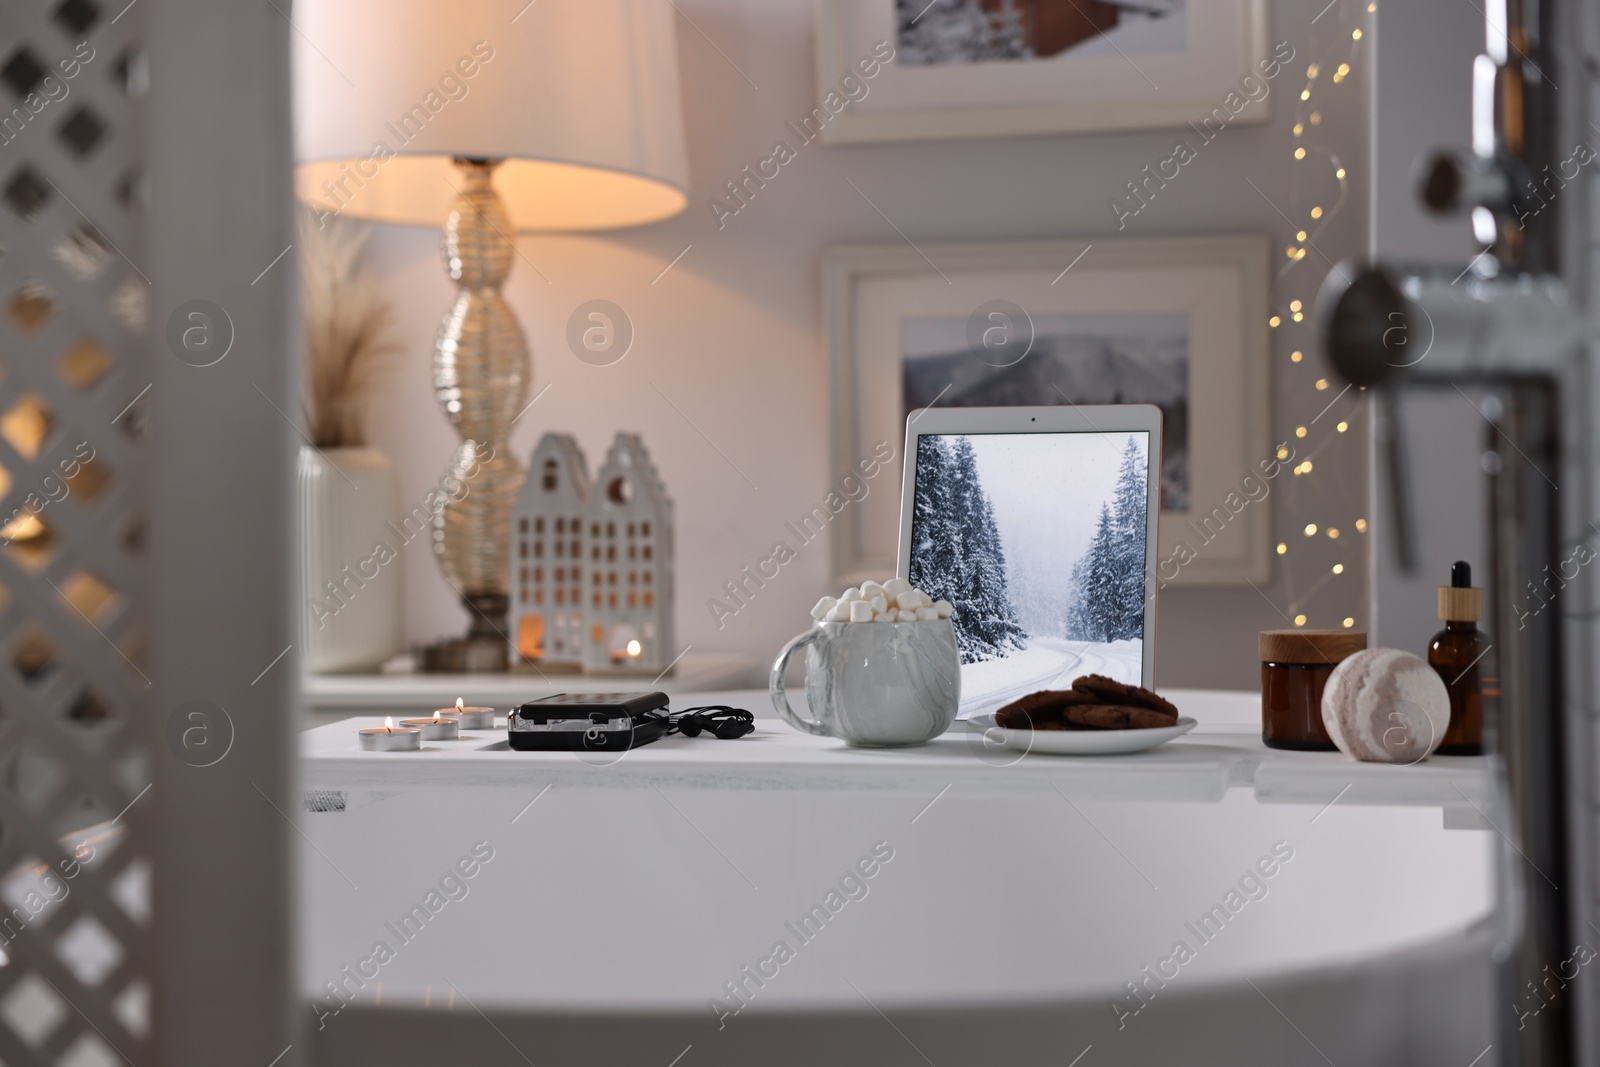 Photo of White wooden tray with tablet, spa products and burning candles on bathtub in bathroom